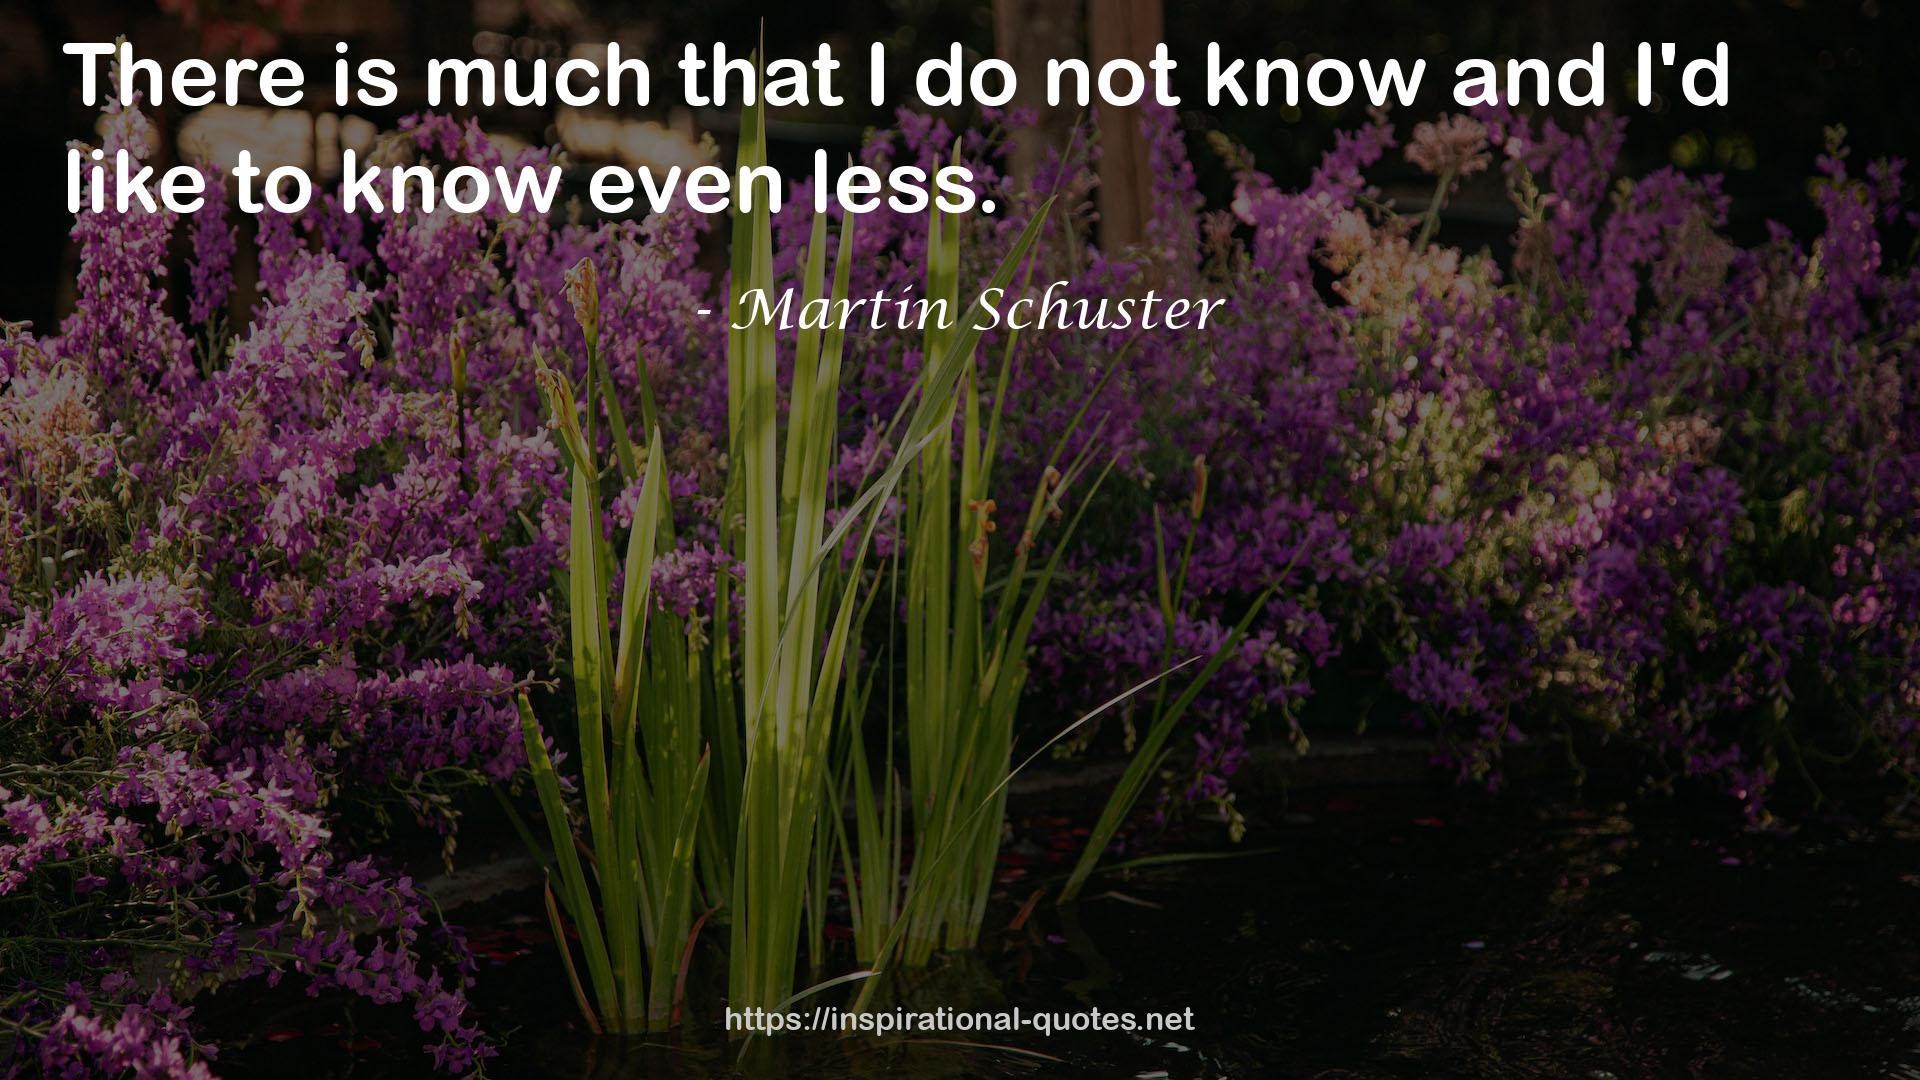 Martin Schuster QUOTES